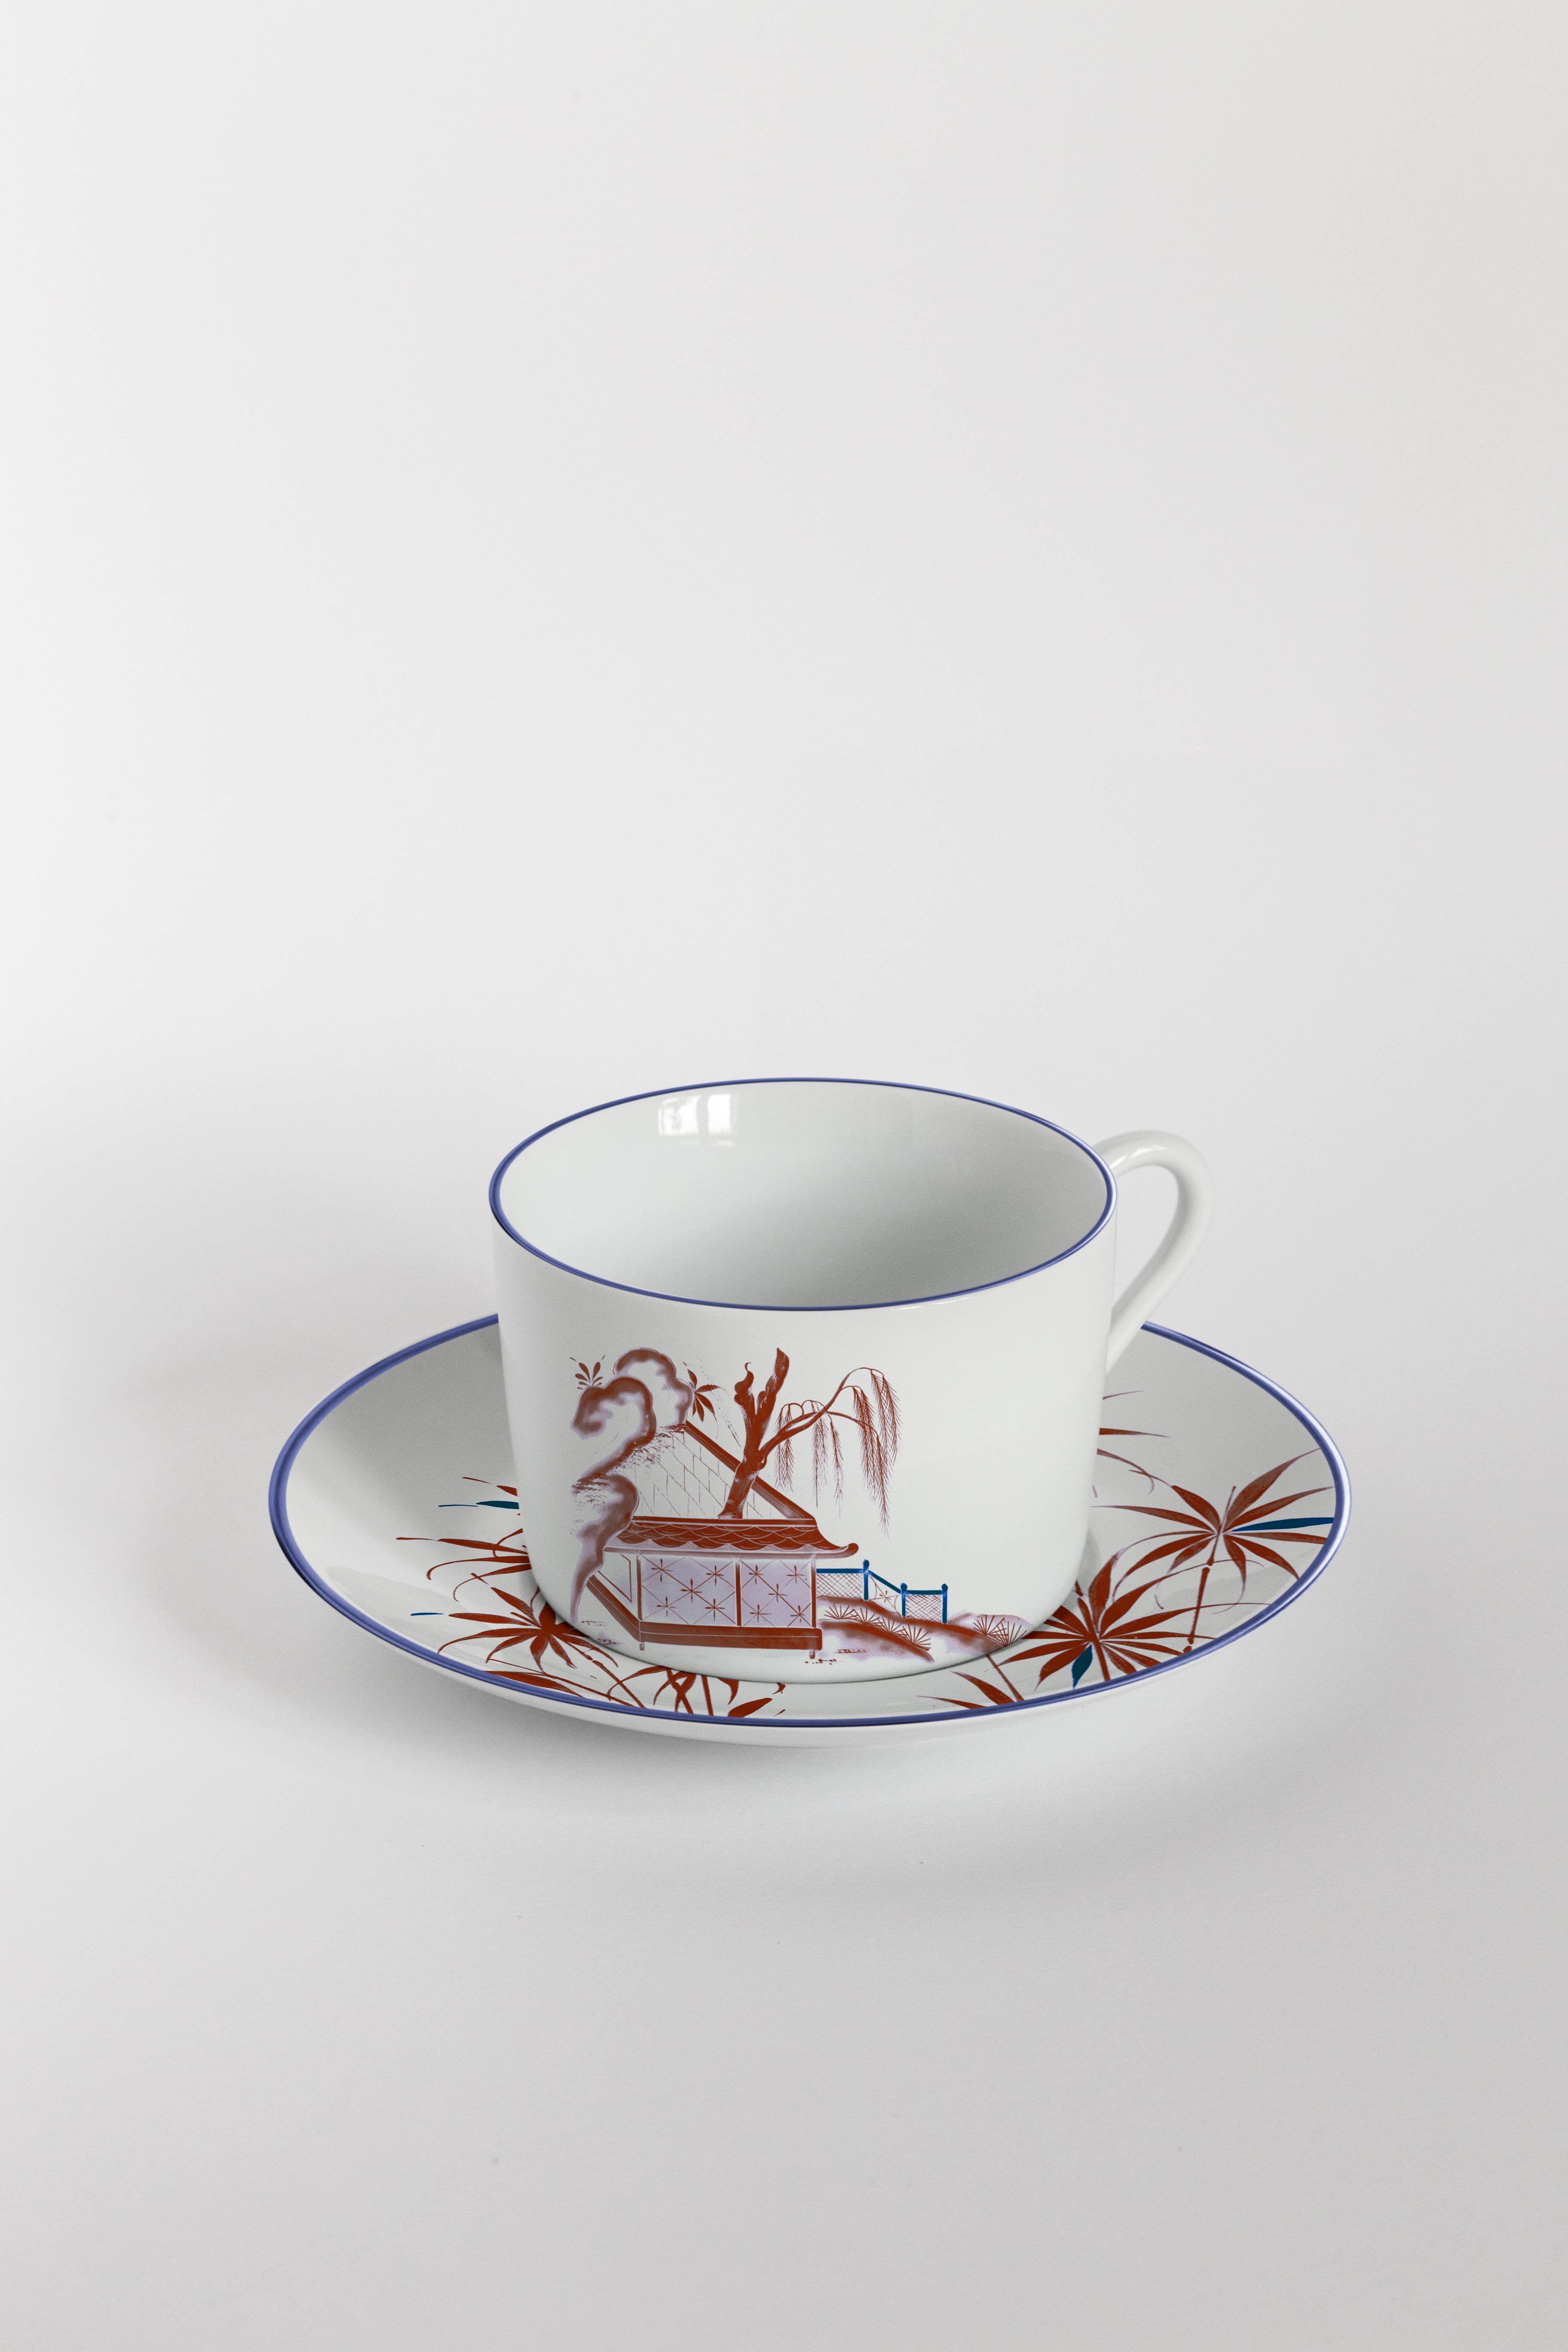 Bordeaux and blue are the primary colors of this Japan inspired collection of plates, where ancient Japanese scenes take place on the rivers of a fairy lake.
Tea set with 6 coffee cups and plates.